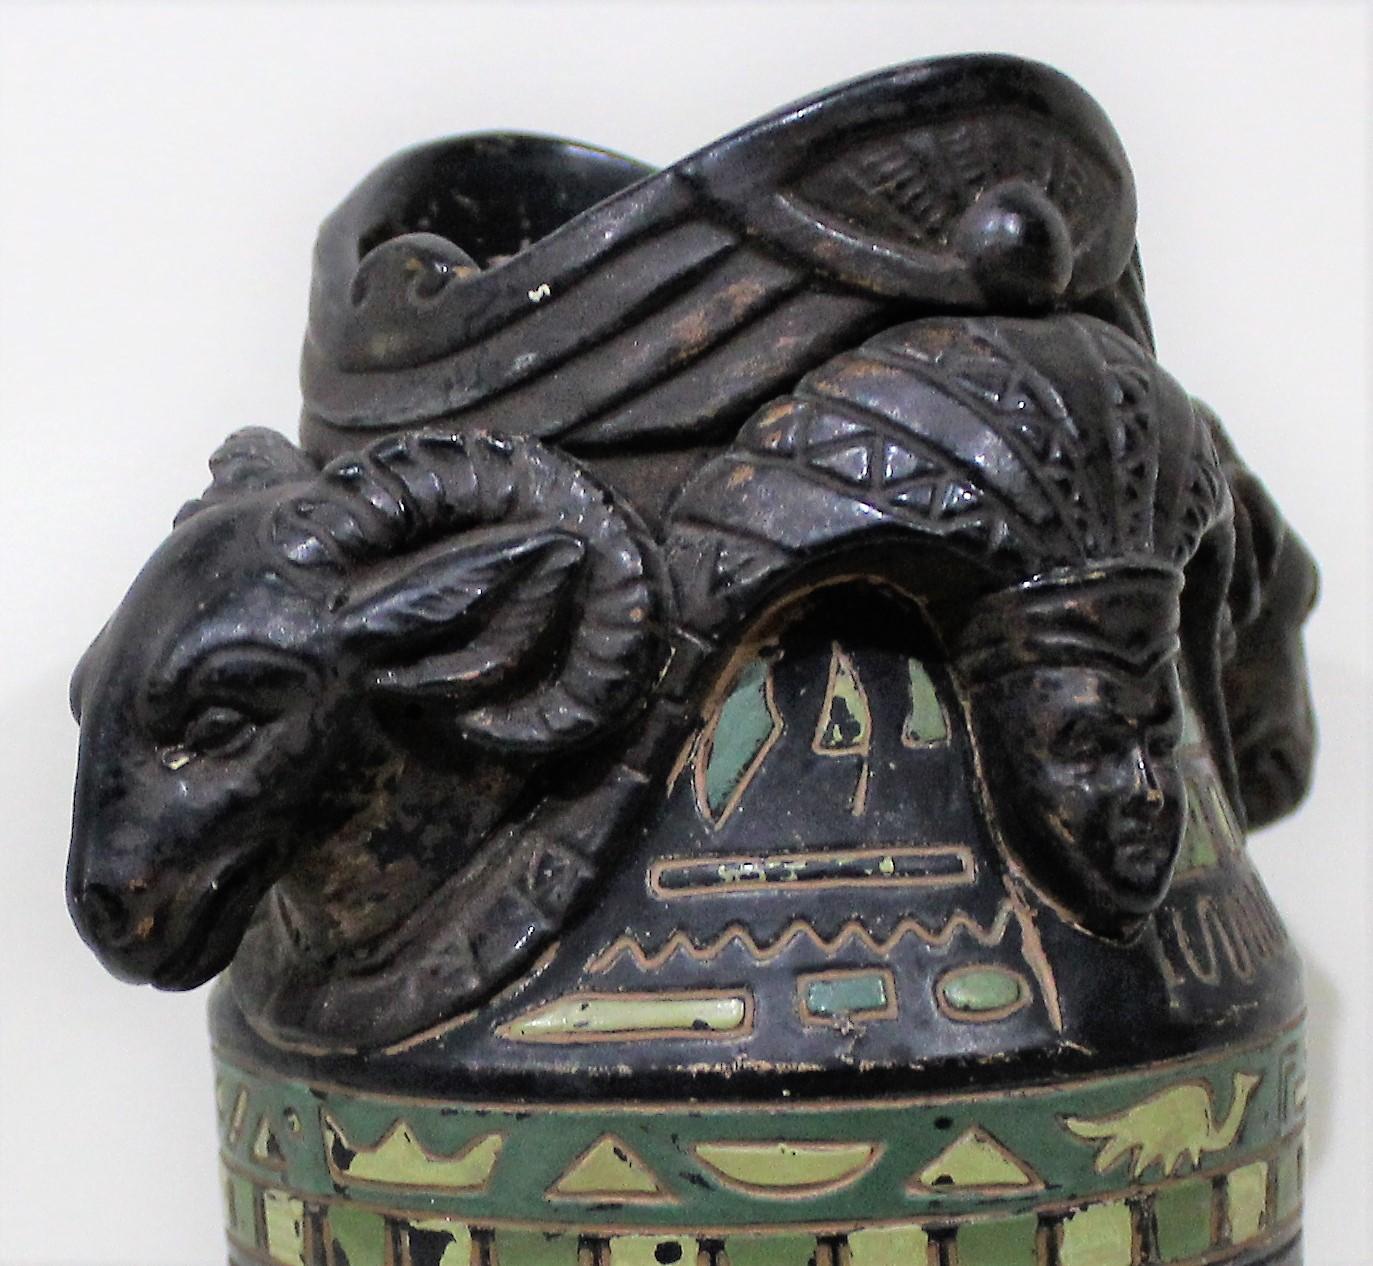 20th Century Egyptian Revival Cold Painted Figural Vase with Rams Heads & Hieroglyphics